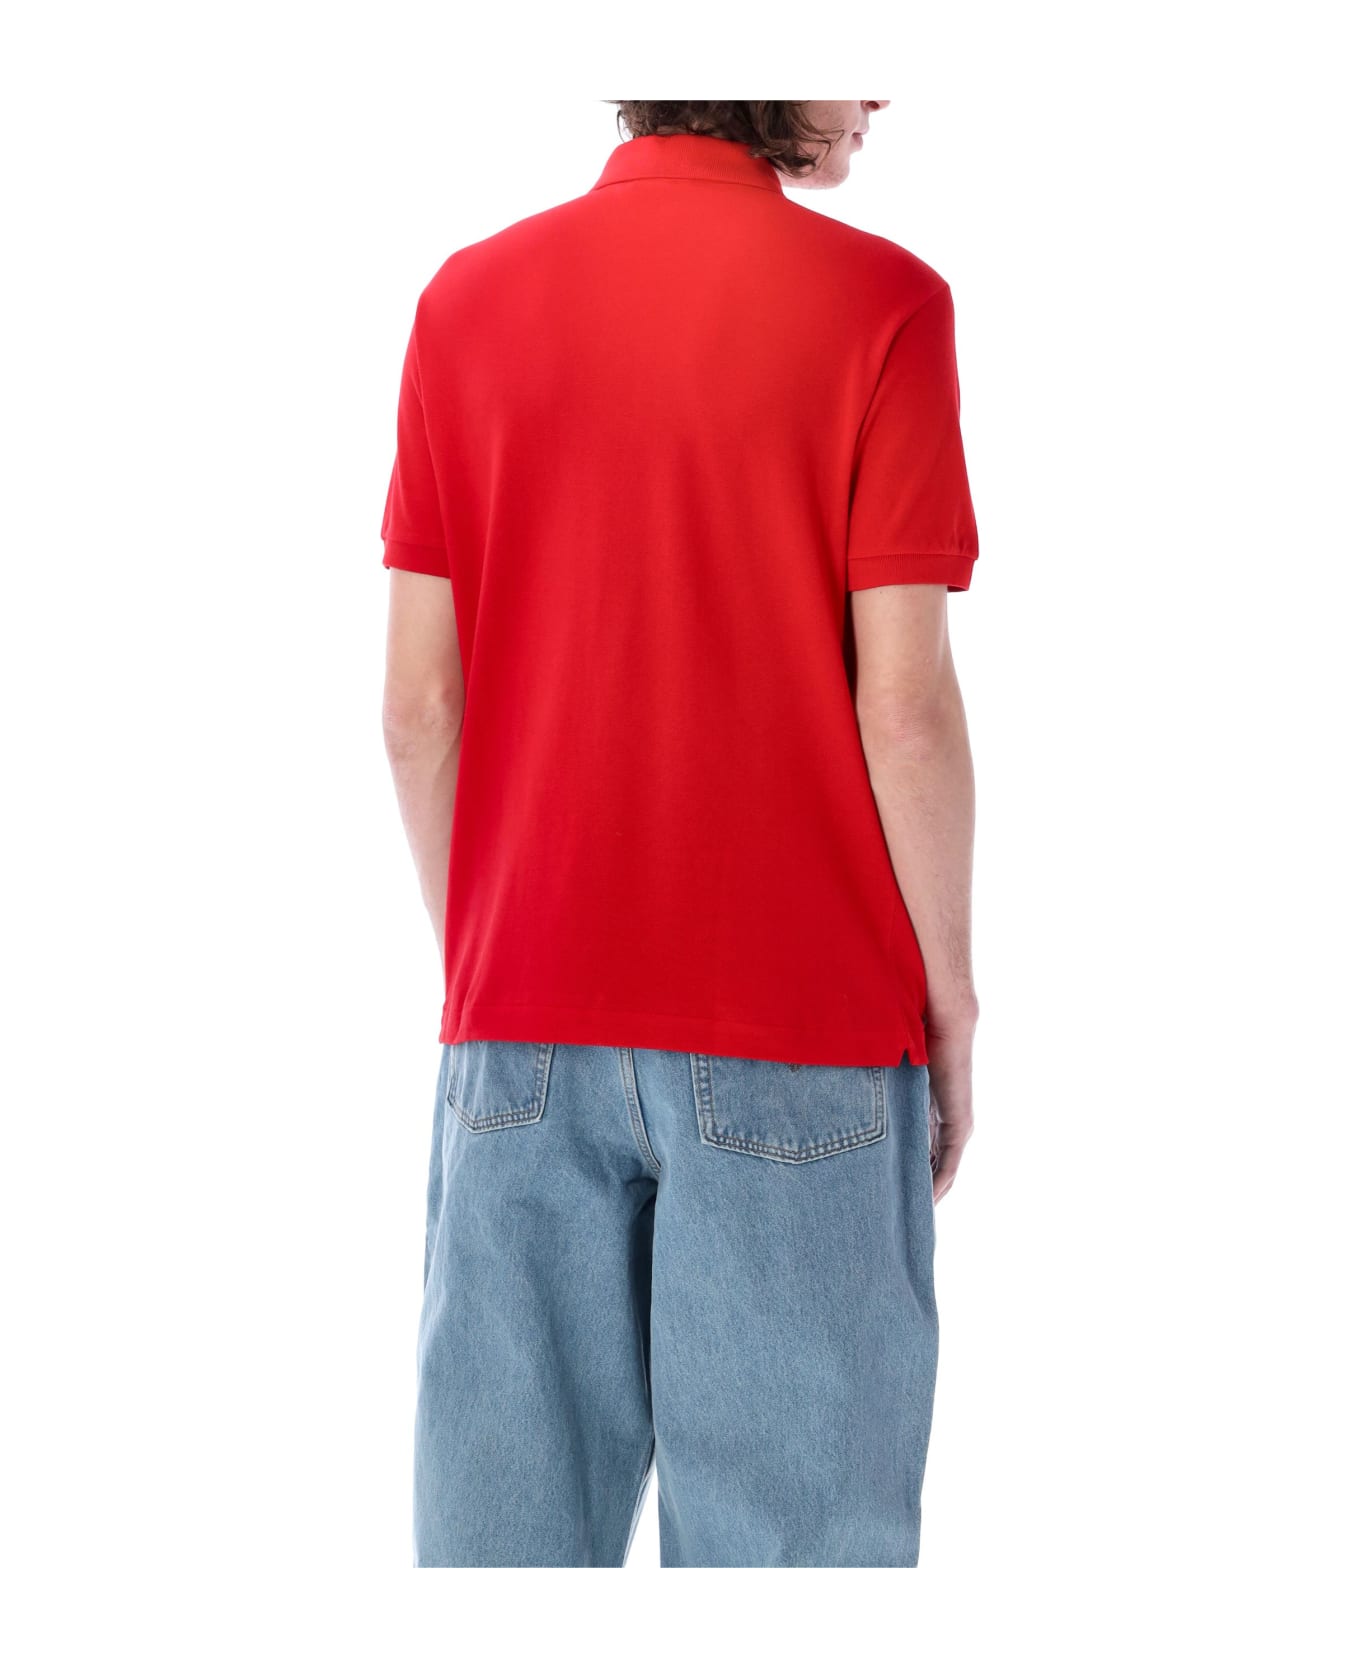 Lacoste Classic Fit Polo Shirt - RED